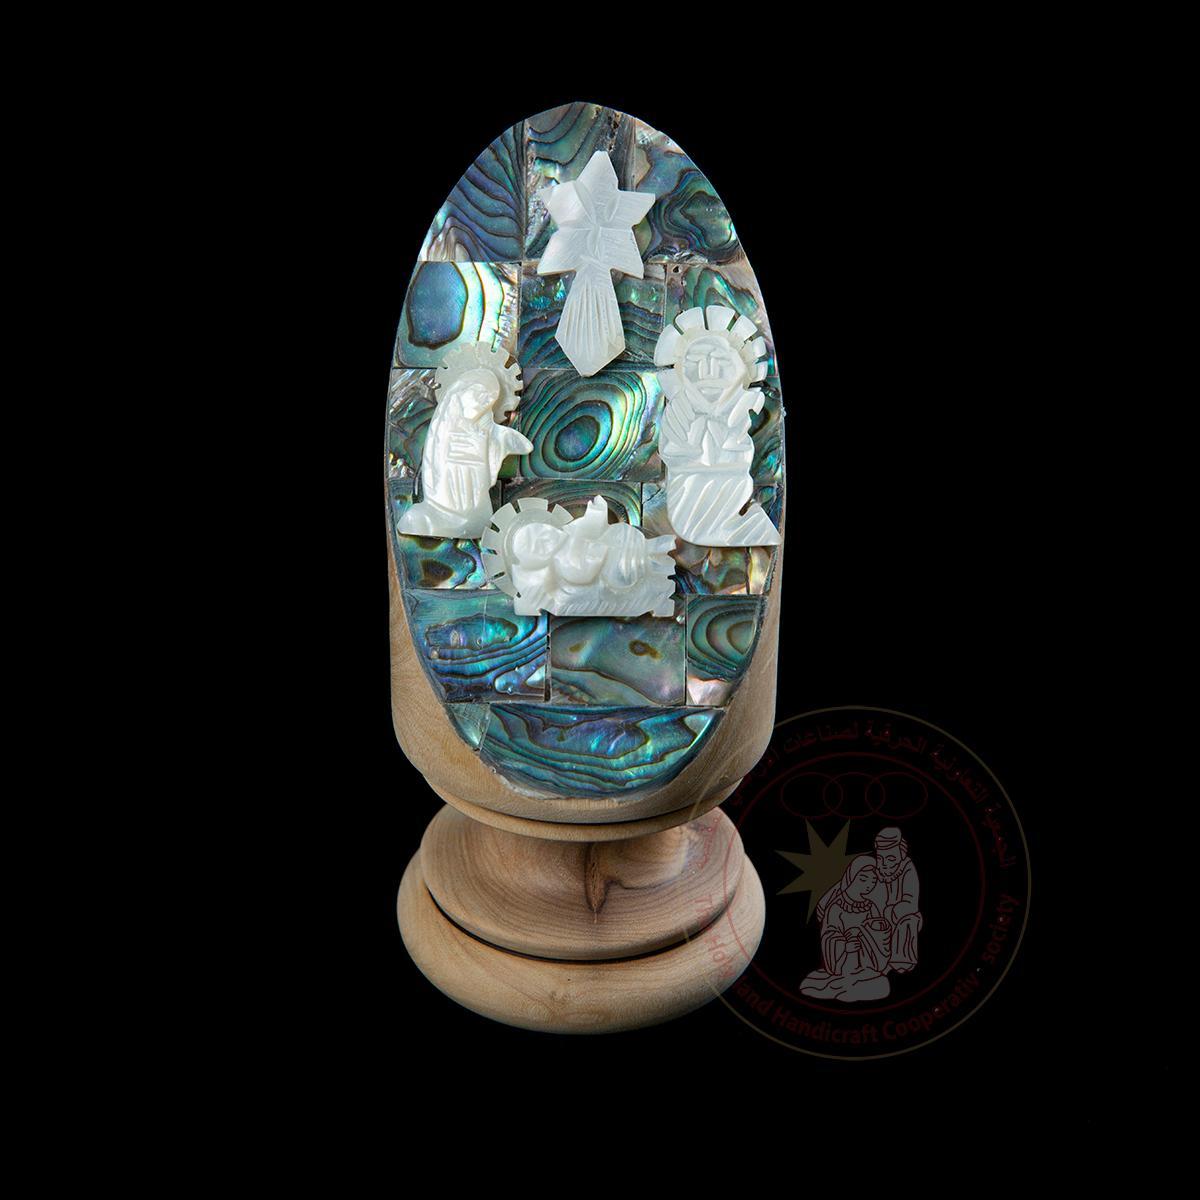 The Holy Family in Bethlehem' Shell Display - Mother of Pearl & Abalone, Olive Wood